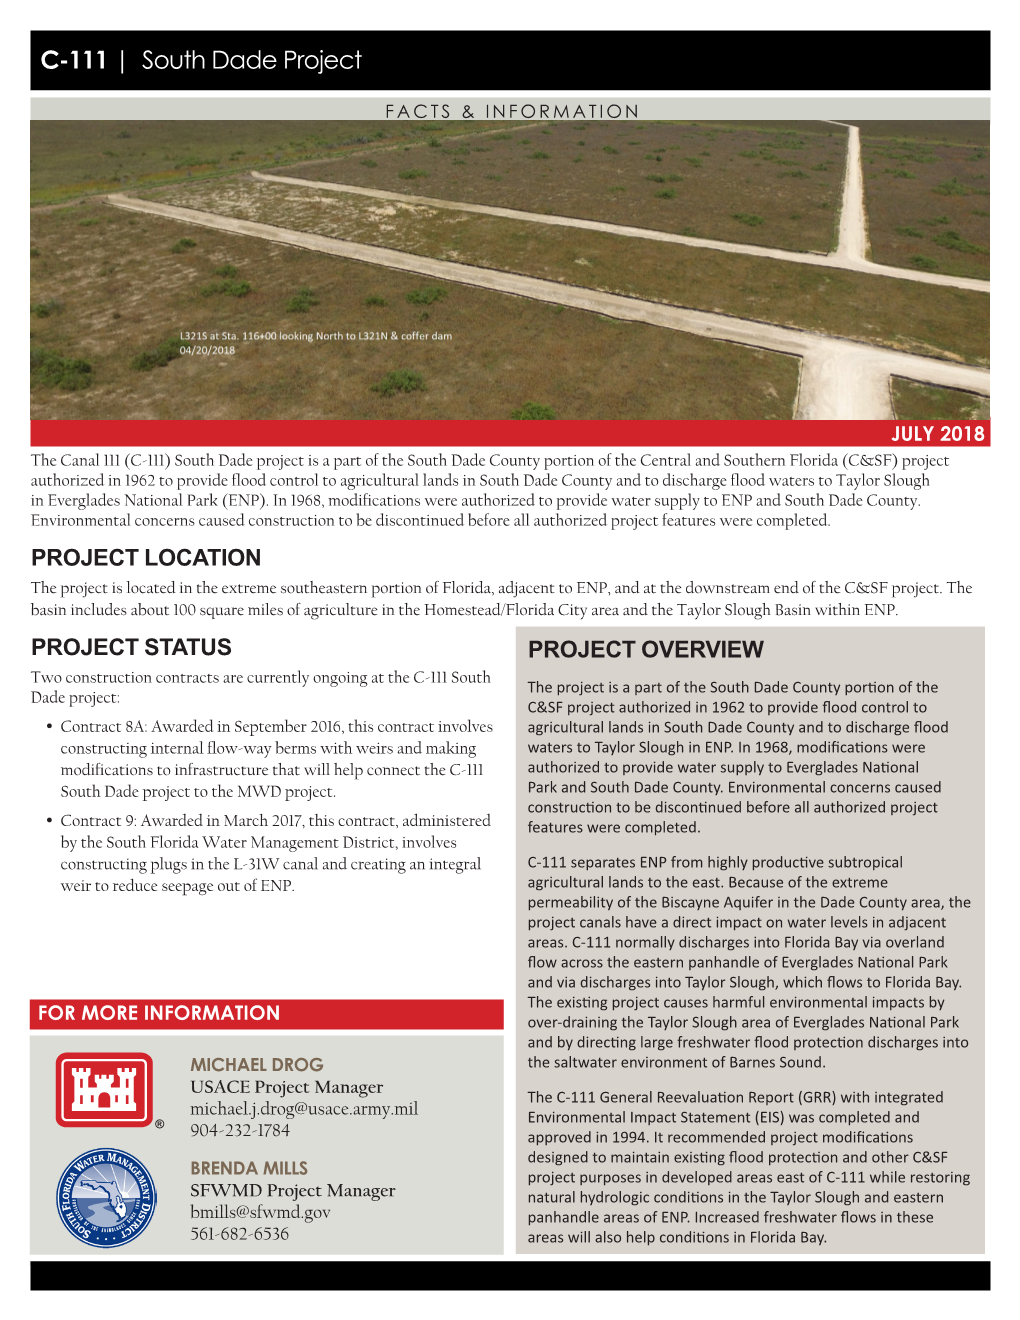 C-111 South Dade Project Fact Sheet